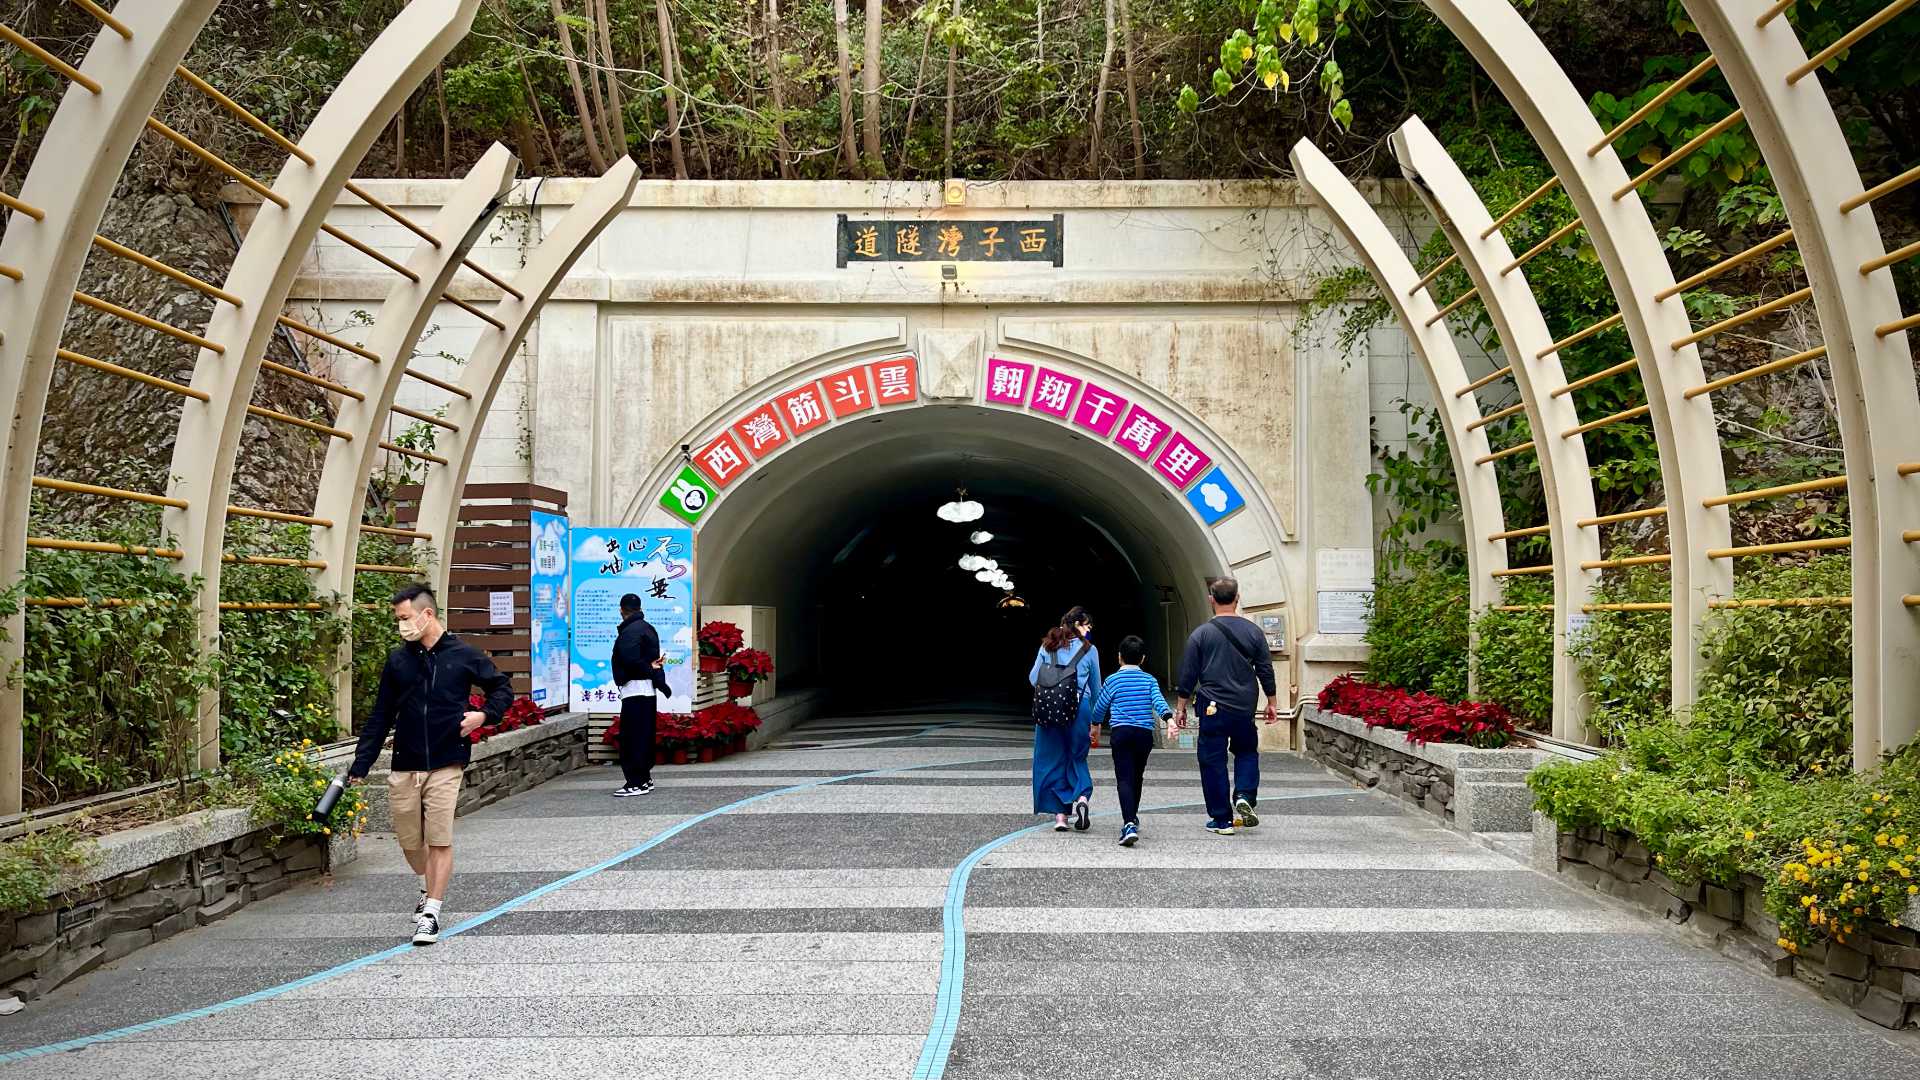 The entrance to Sizihwan Tunnel, with three pedestrians about to enter and two walking out.